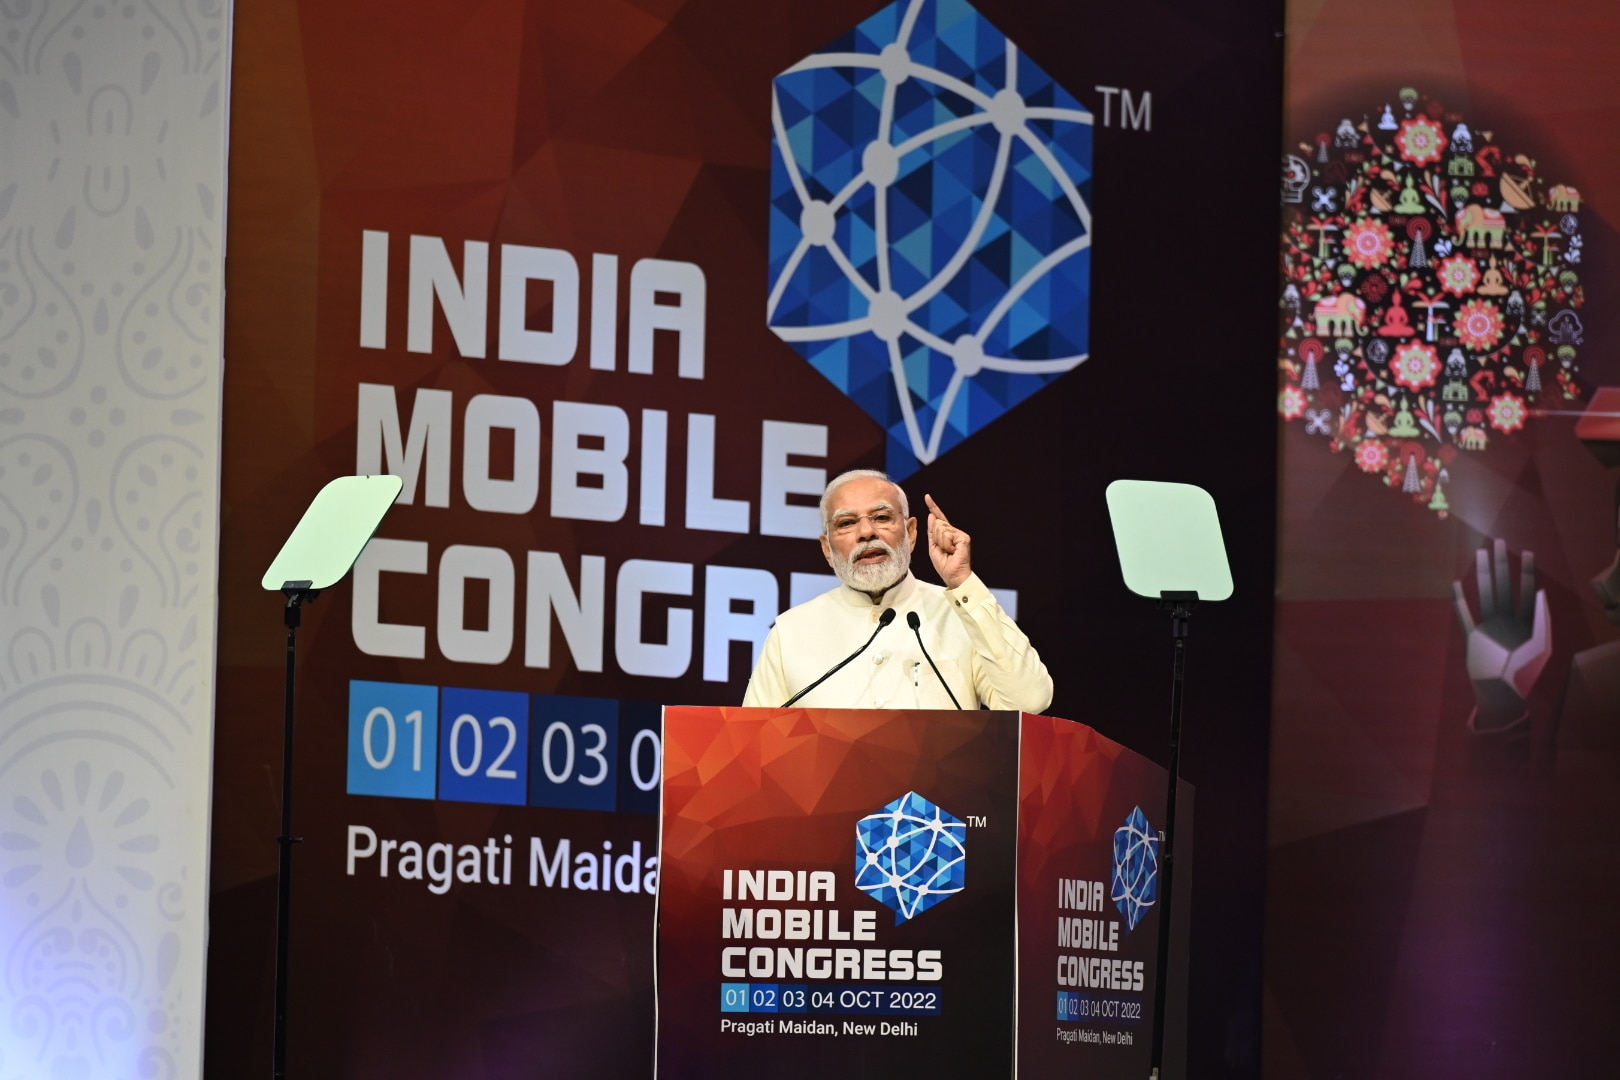 5G services launched in India by PM Modi